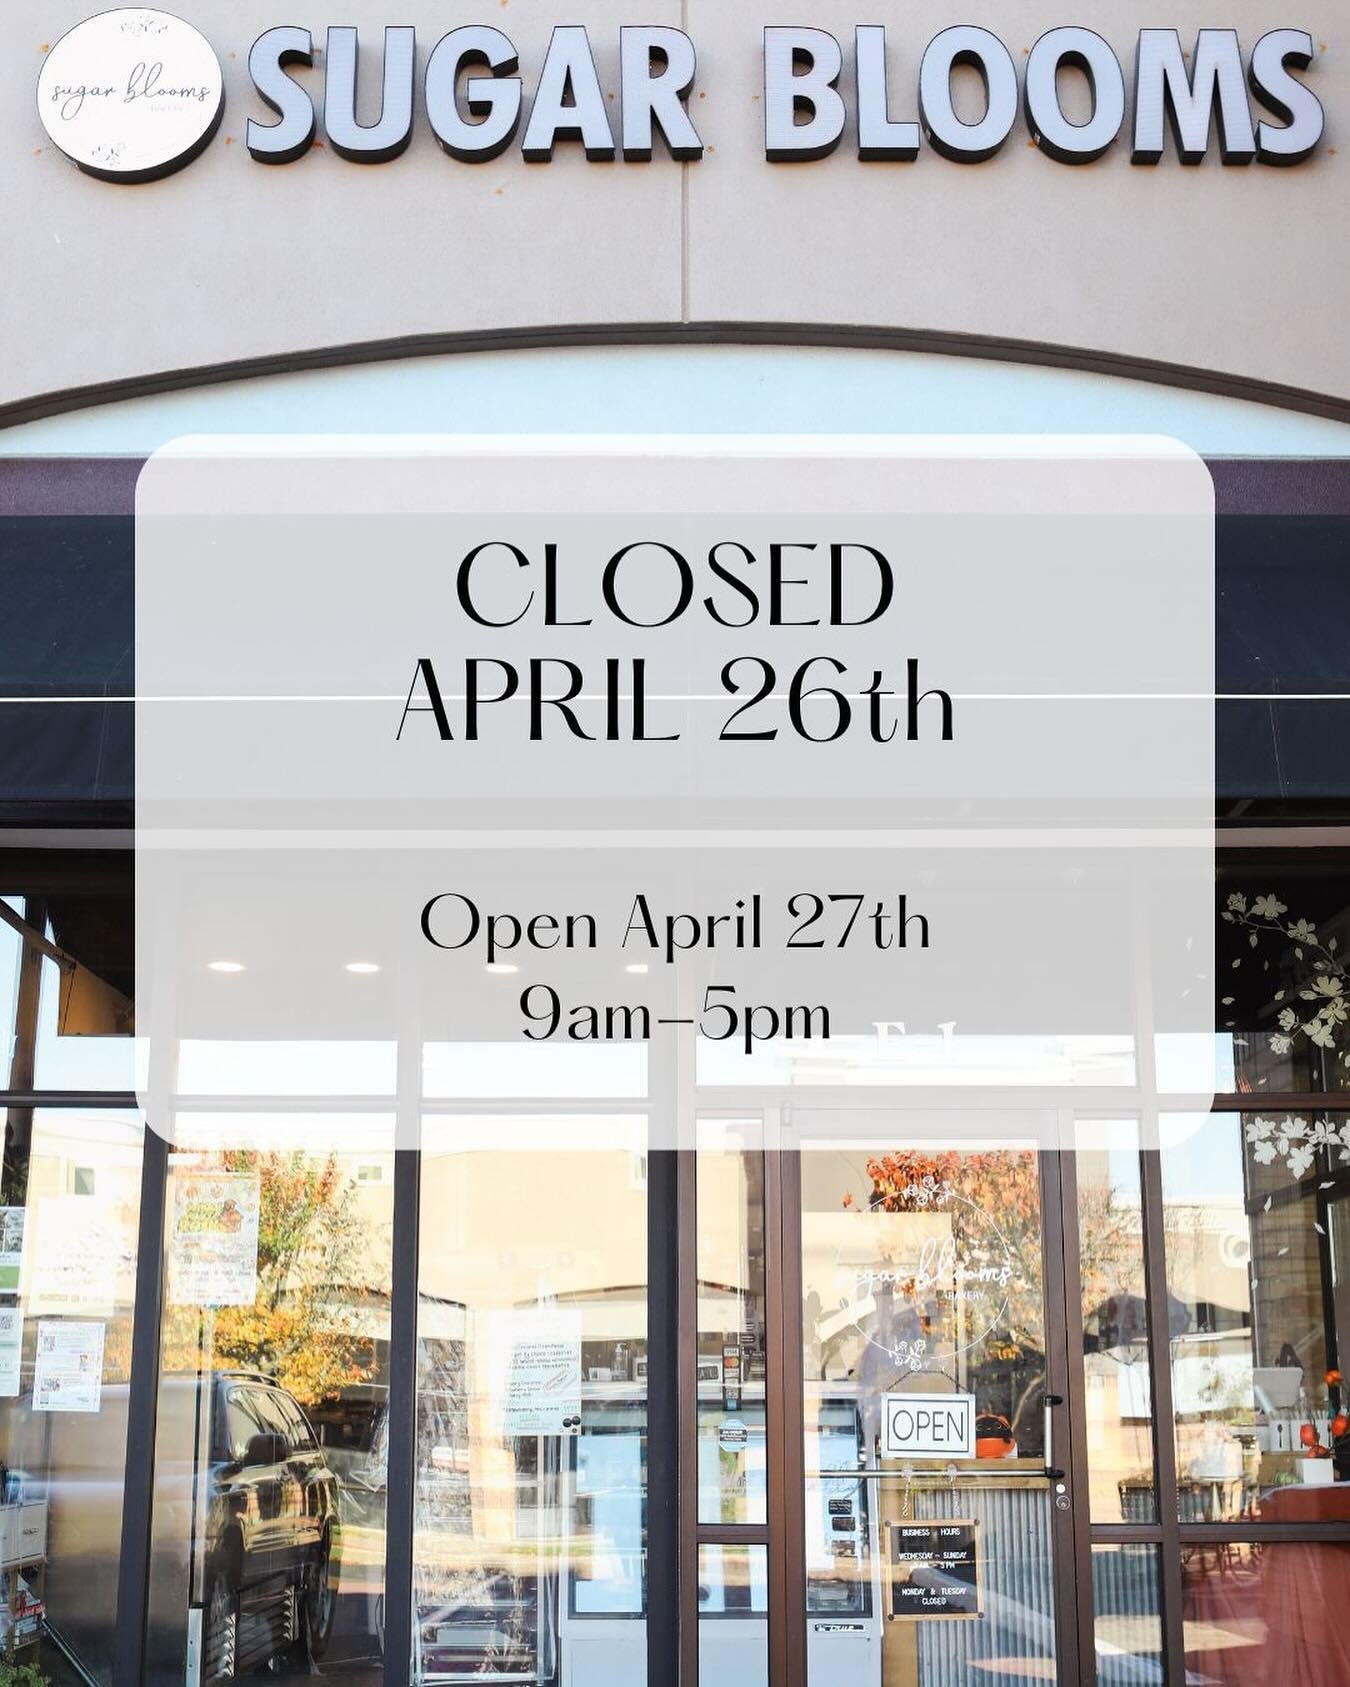 We&rsquo;re CLOSED today, April 26th, for a special catering event. If you&rsquo;ve got a cake order waiting, don&rsquo;t worry&mdash;it&rsquo;s still in the works! 

We&rsquo;ll be back tomorrow, April 27th, from 9 am to 5 pm. Our bakery has been bu